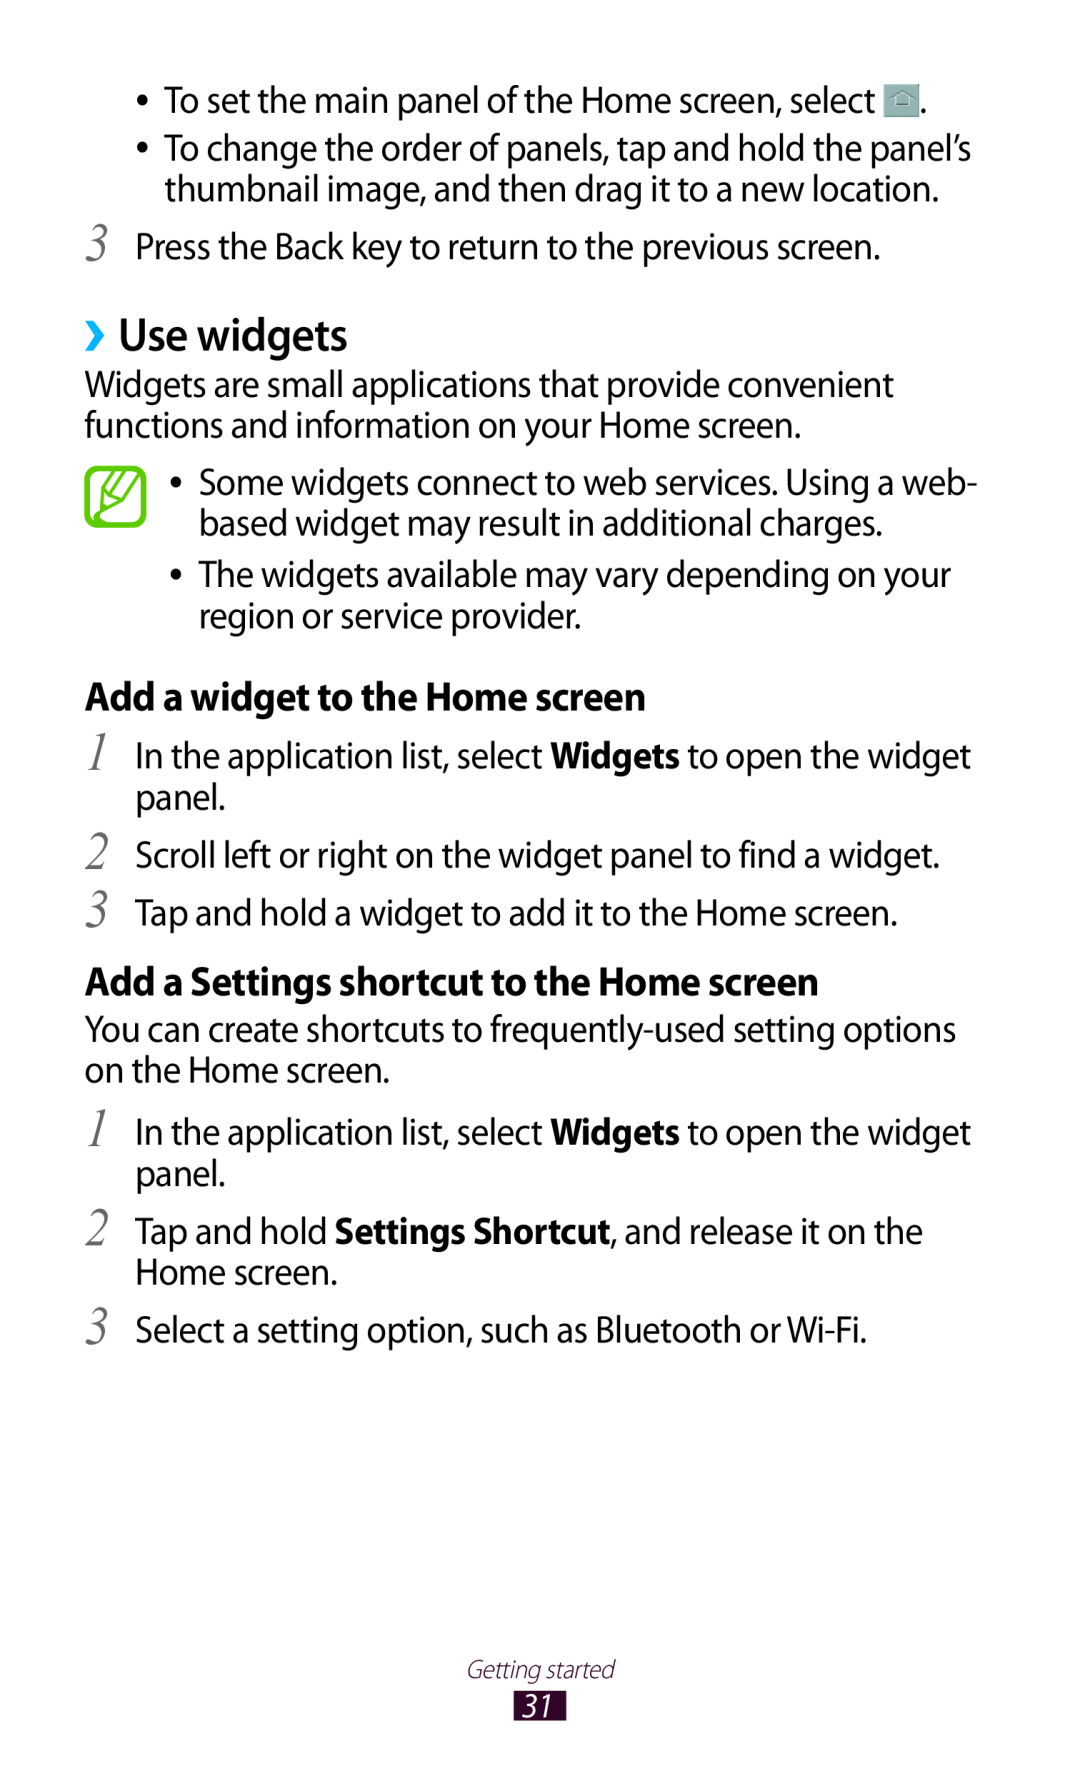 Samsung GT-I8160ZWATMN manual ››Use widgets, Add a widget to the Home screen, Add a Settings shortcut to the Home screen 